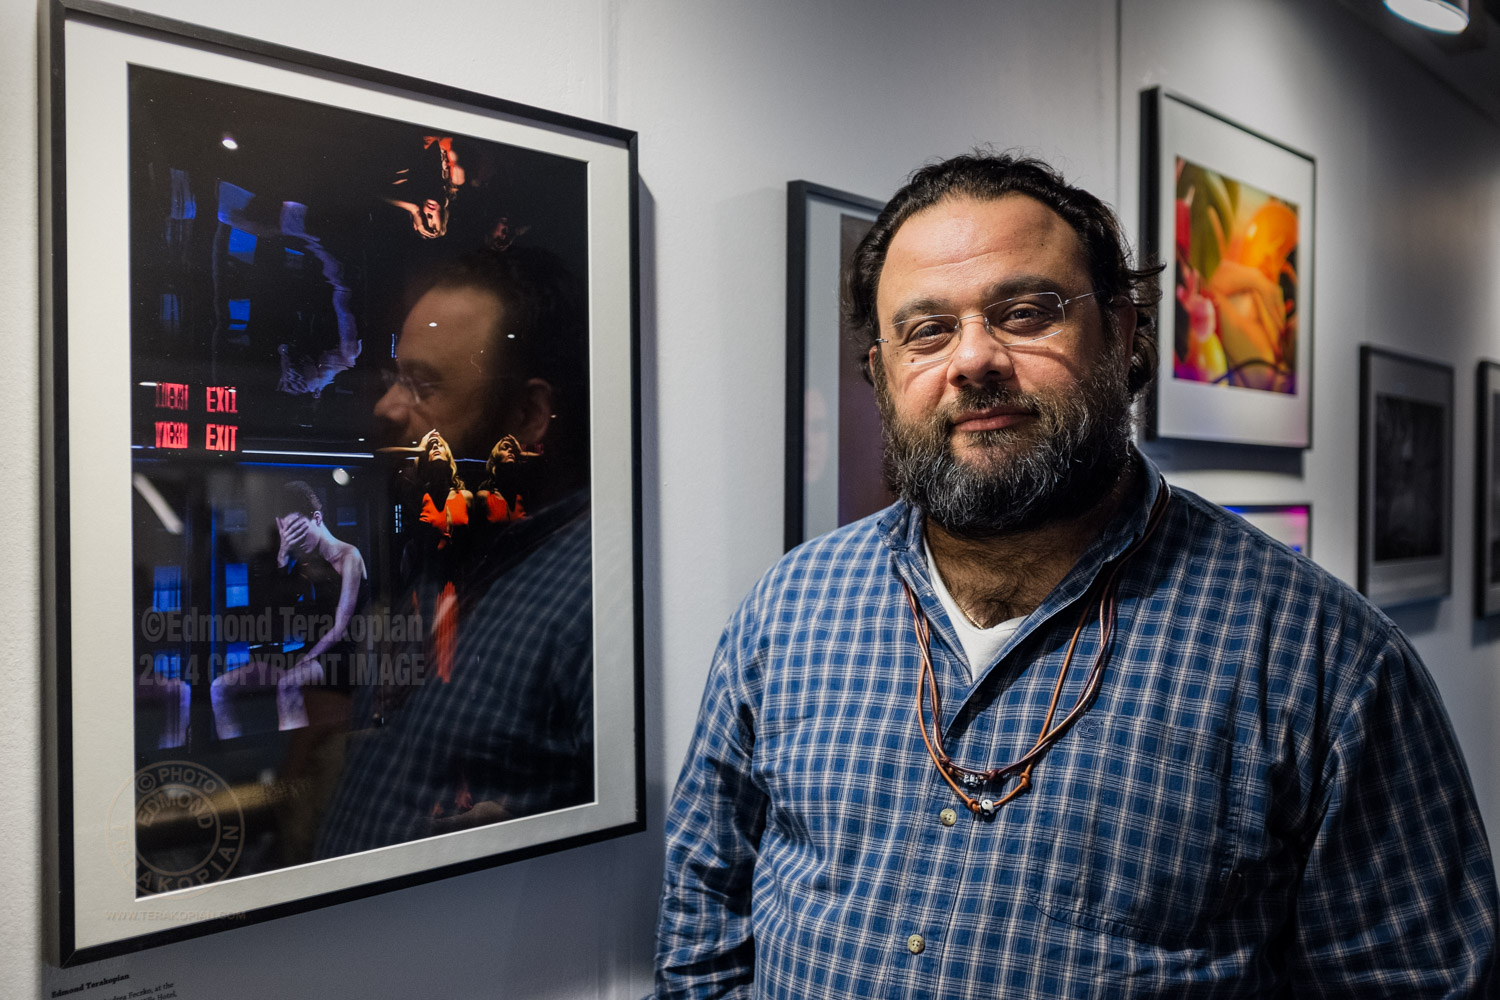 2014 AOP Photographers Awards. Photographer Edmond Terakopian by his portrait of Andrea Feczko which was a finalist in the Open Award. Islington Business Design Centre, London. December 11, 2014. Photo: Nathan Wake